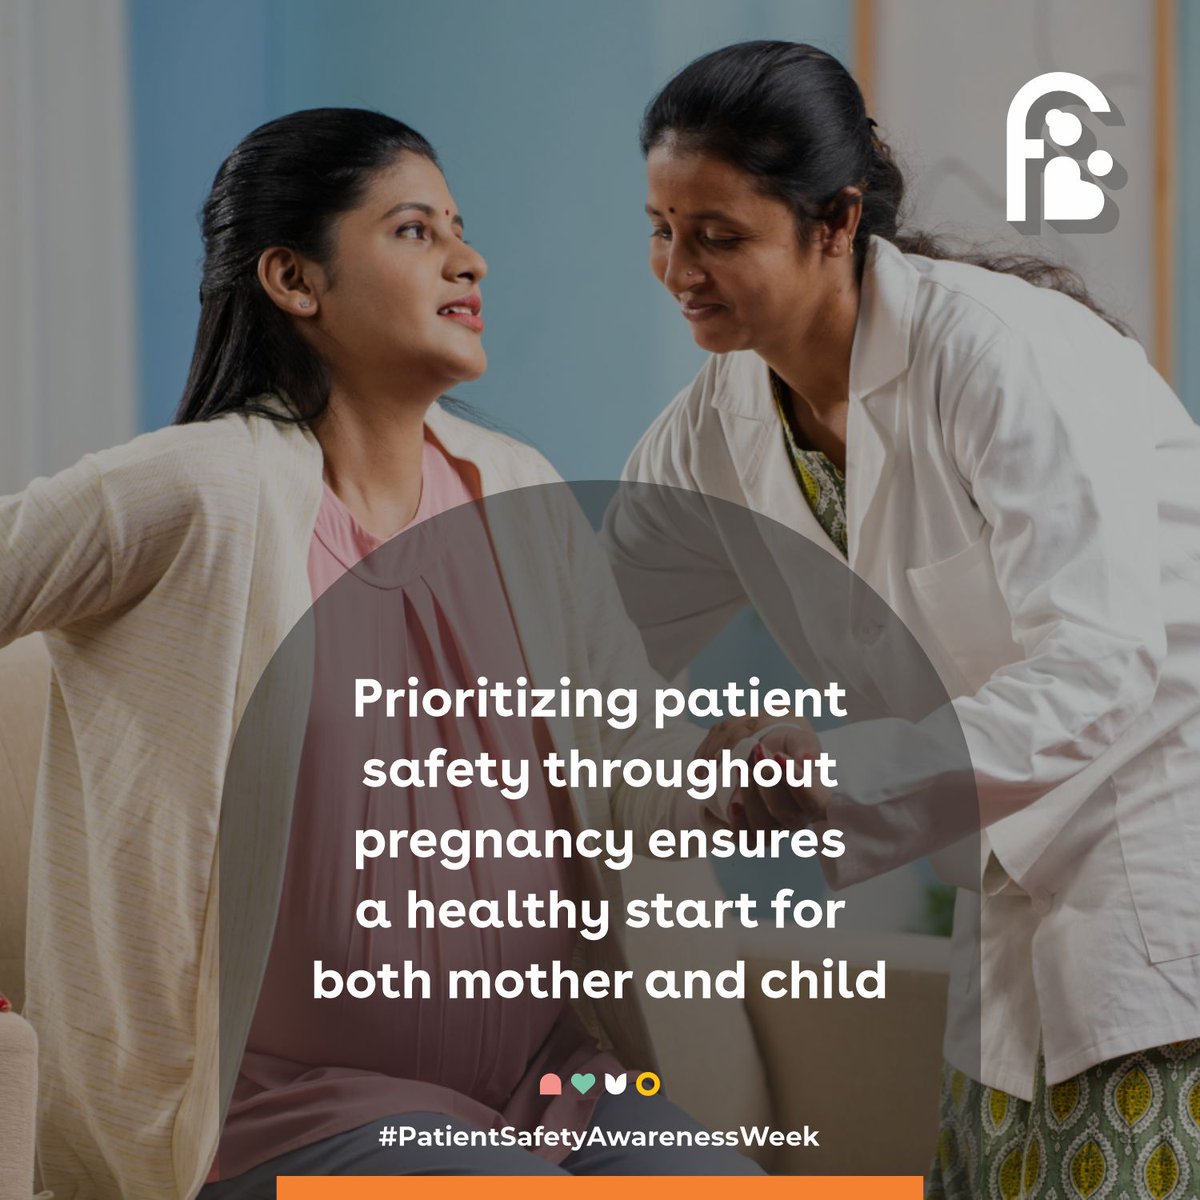 👫Safer Together: At Fernandez, patient safety isn't just a priority; it's our promise.

Join us in commemorating Patient Safety Awareness Week as we advocate for safety of mothers and babies.

#FernandezHospital #SaferTogether #PatientSafety #HealthyPregnancy #BetterBirthing